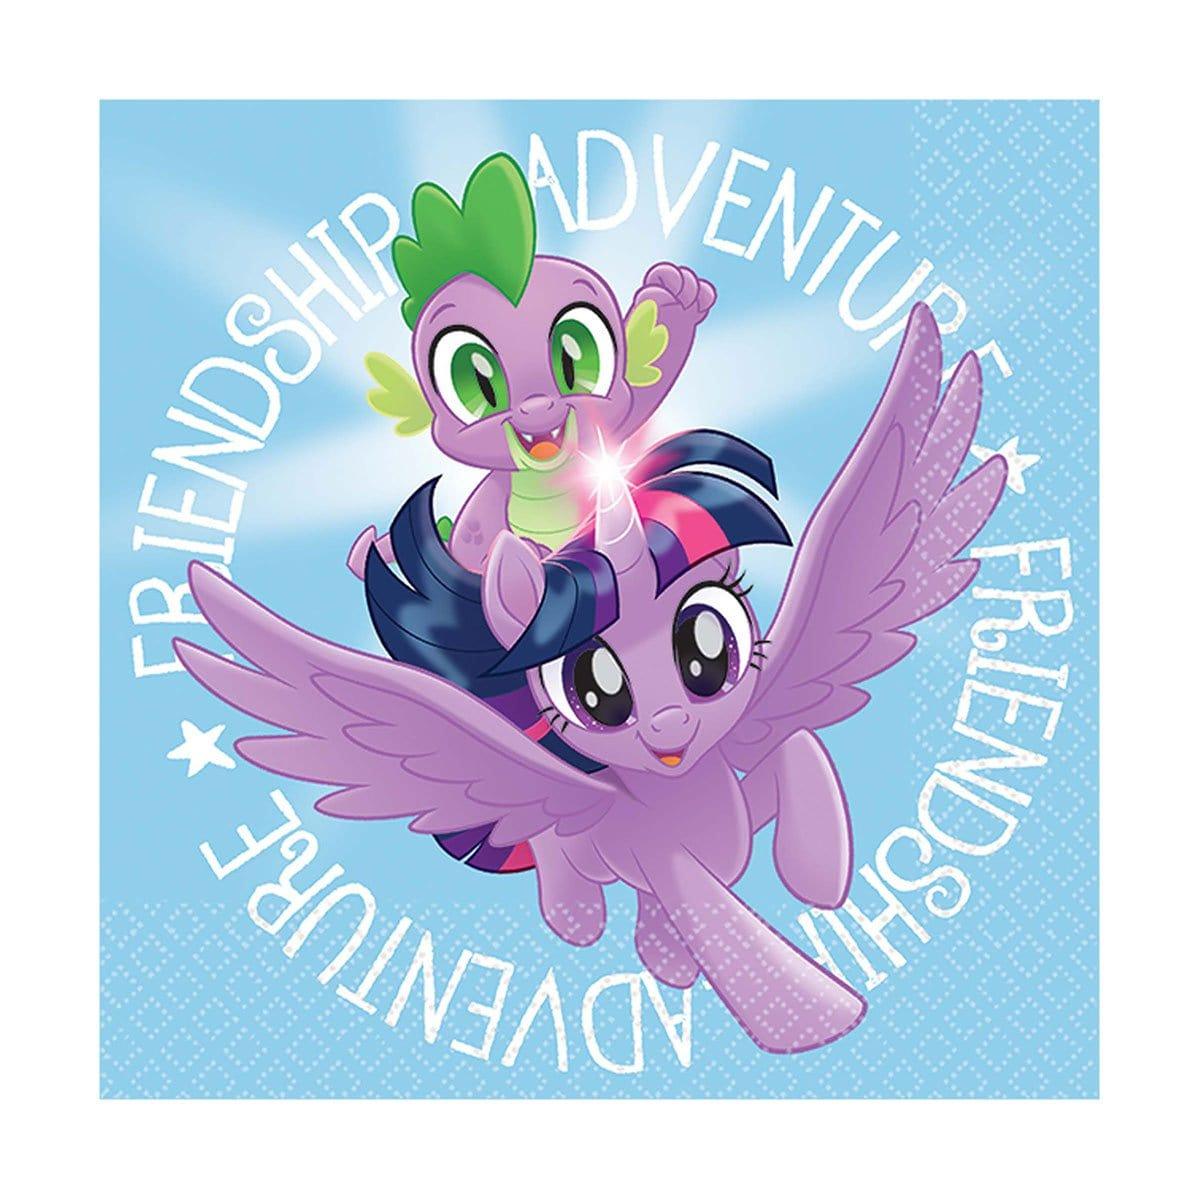 Buy Kids Birthday My Little Pony beverage napkins, 16 per package sold at Party Expert